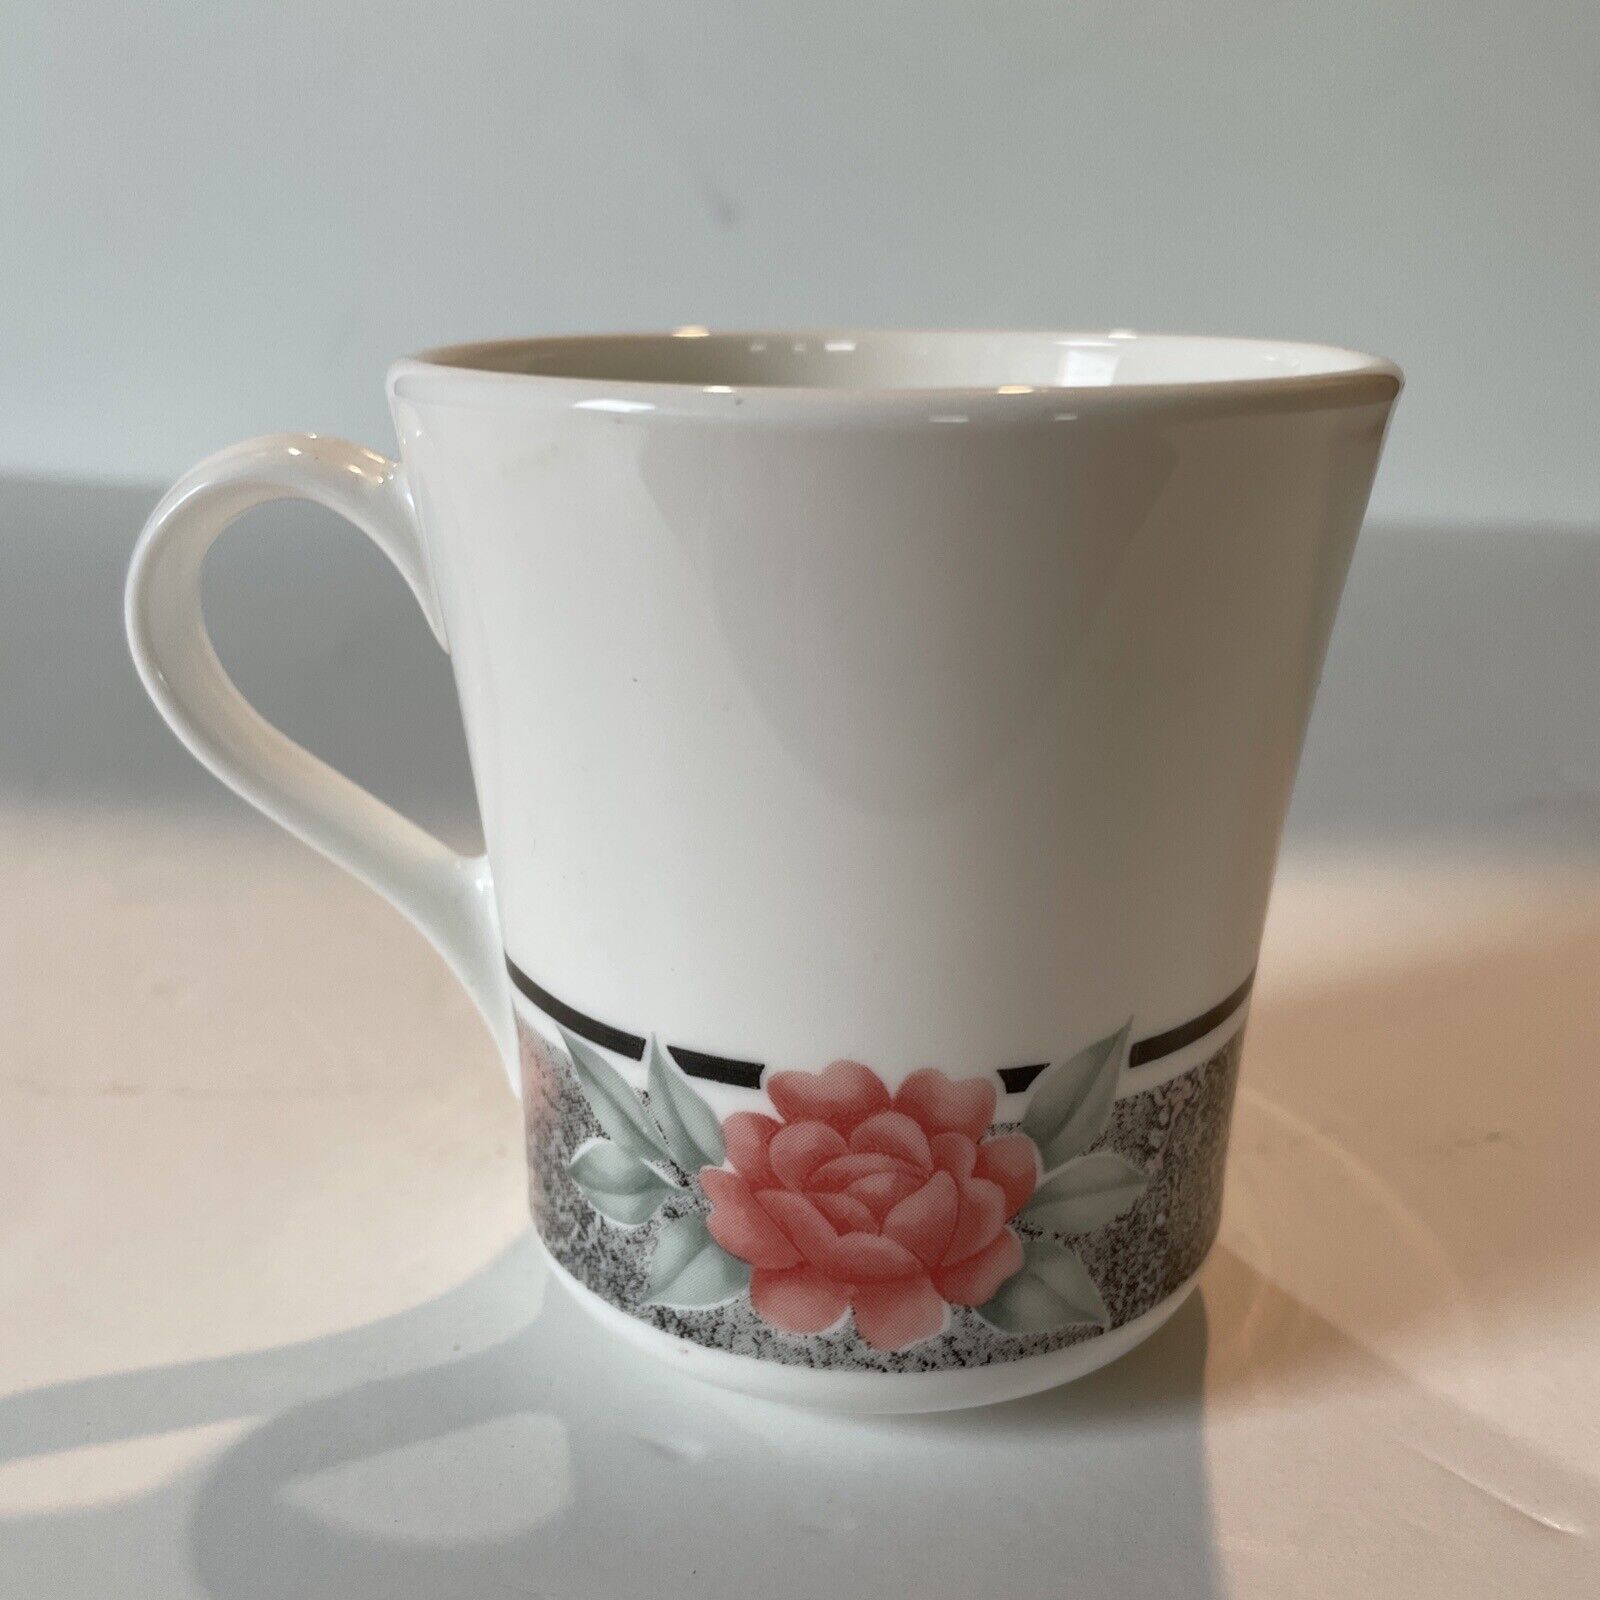 CORELLE CORNING SILK AND ROSES MUG  9 Available Never Used Excellent